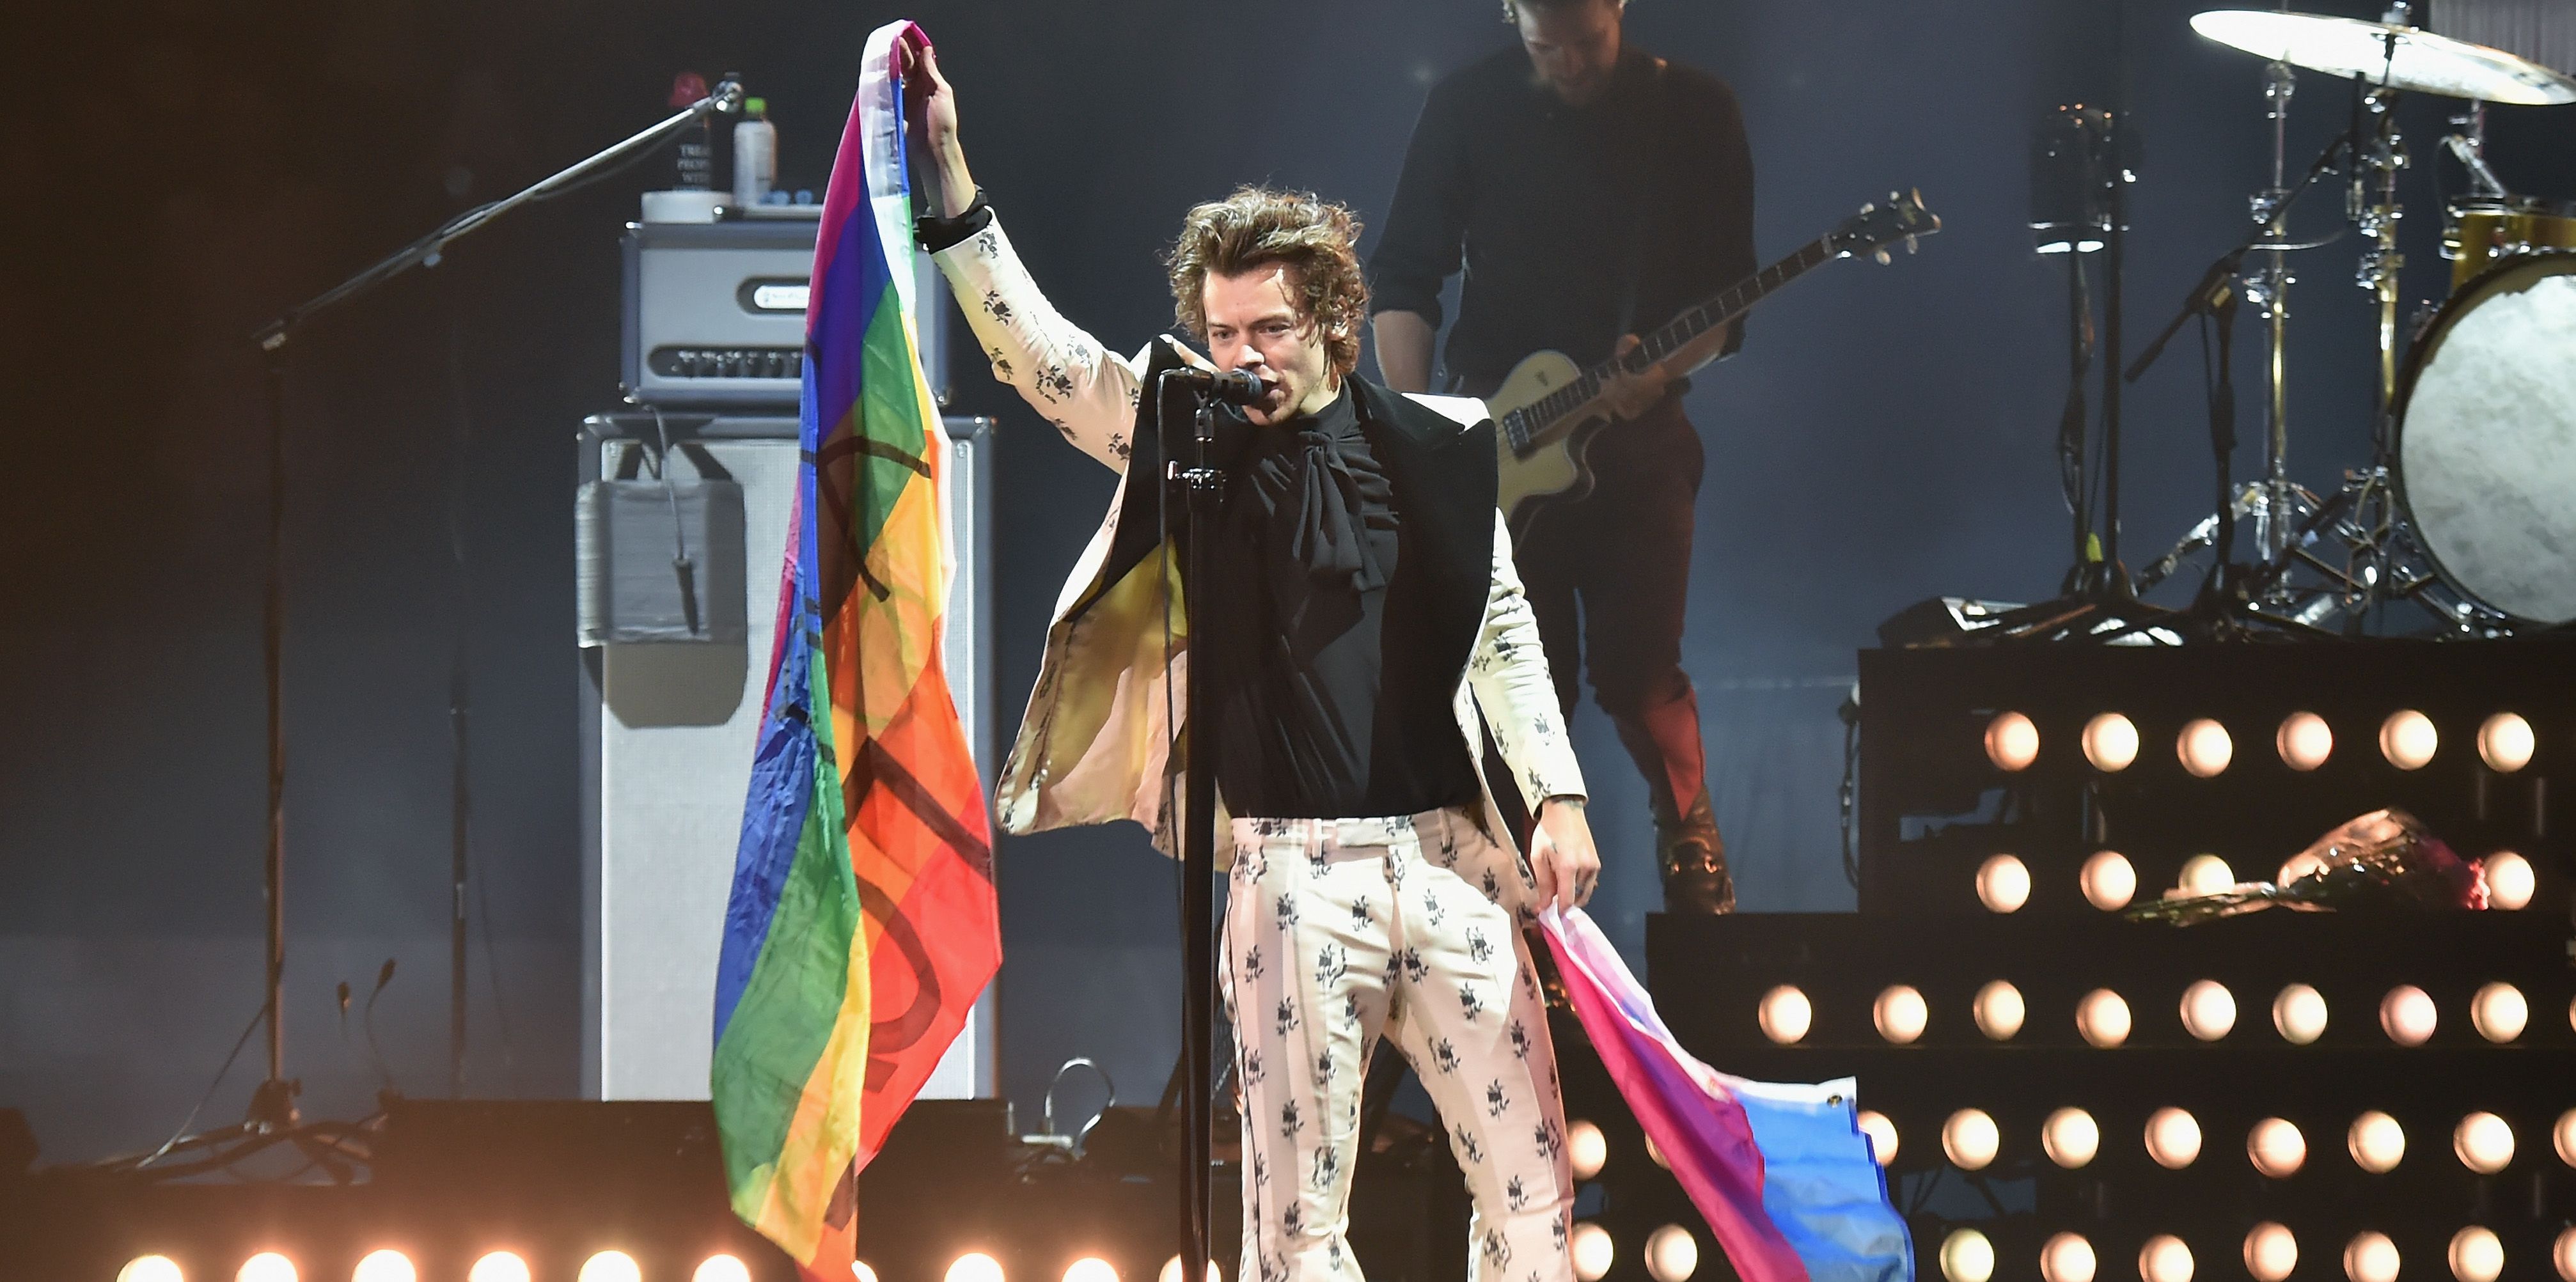 Harry Styles Concert Review Harry Styles Concert Gave Me Faith in the Youths